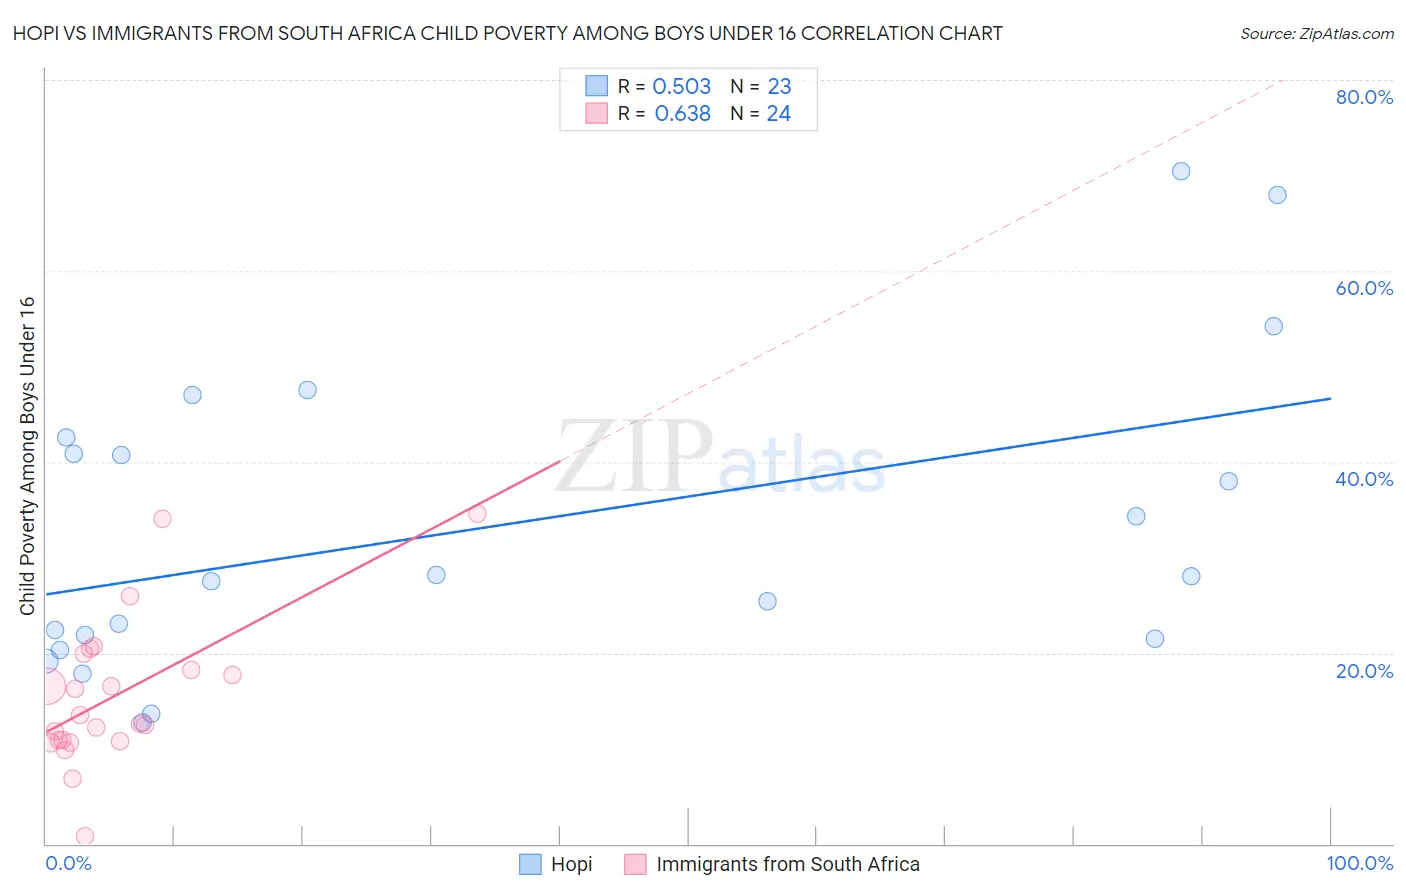 Hopi vs Immigrants from South Africa Child Poverty Among Boys Under 16